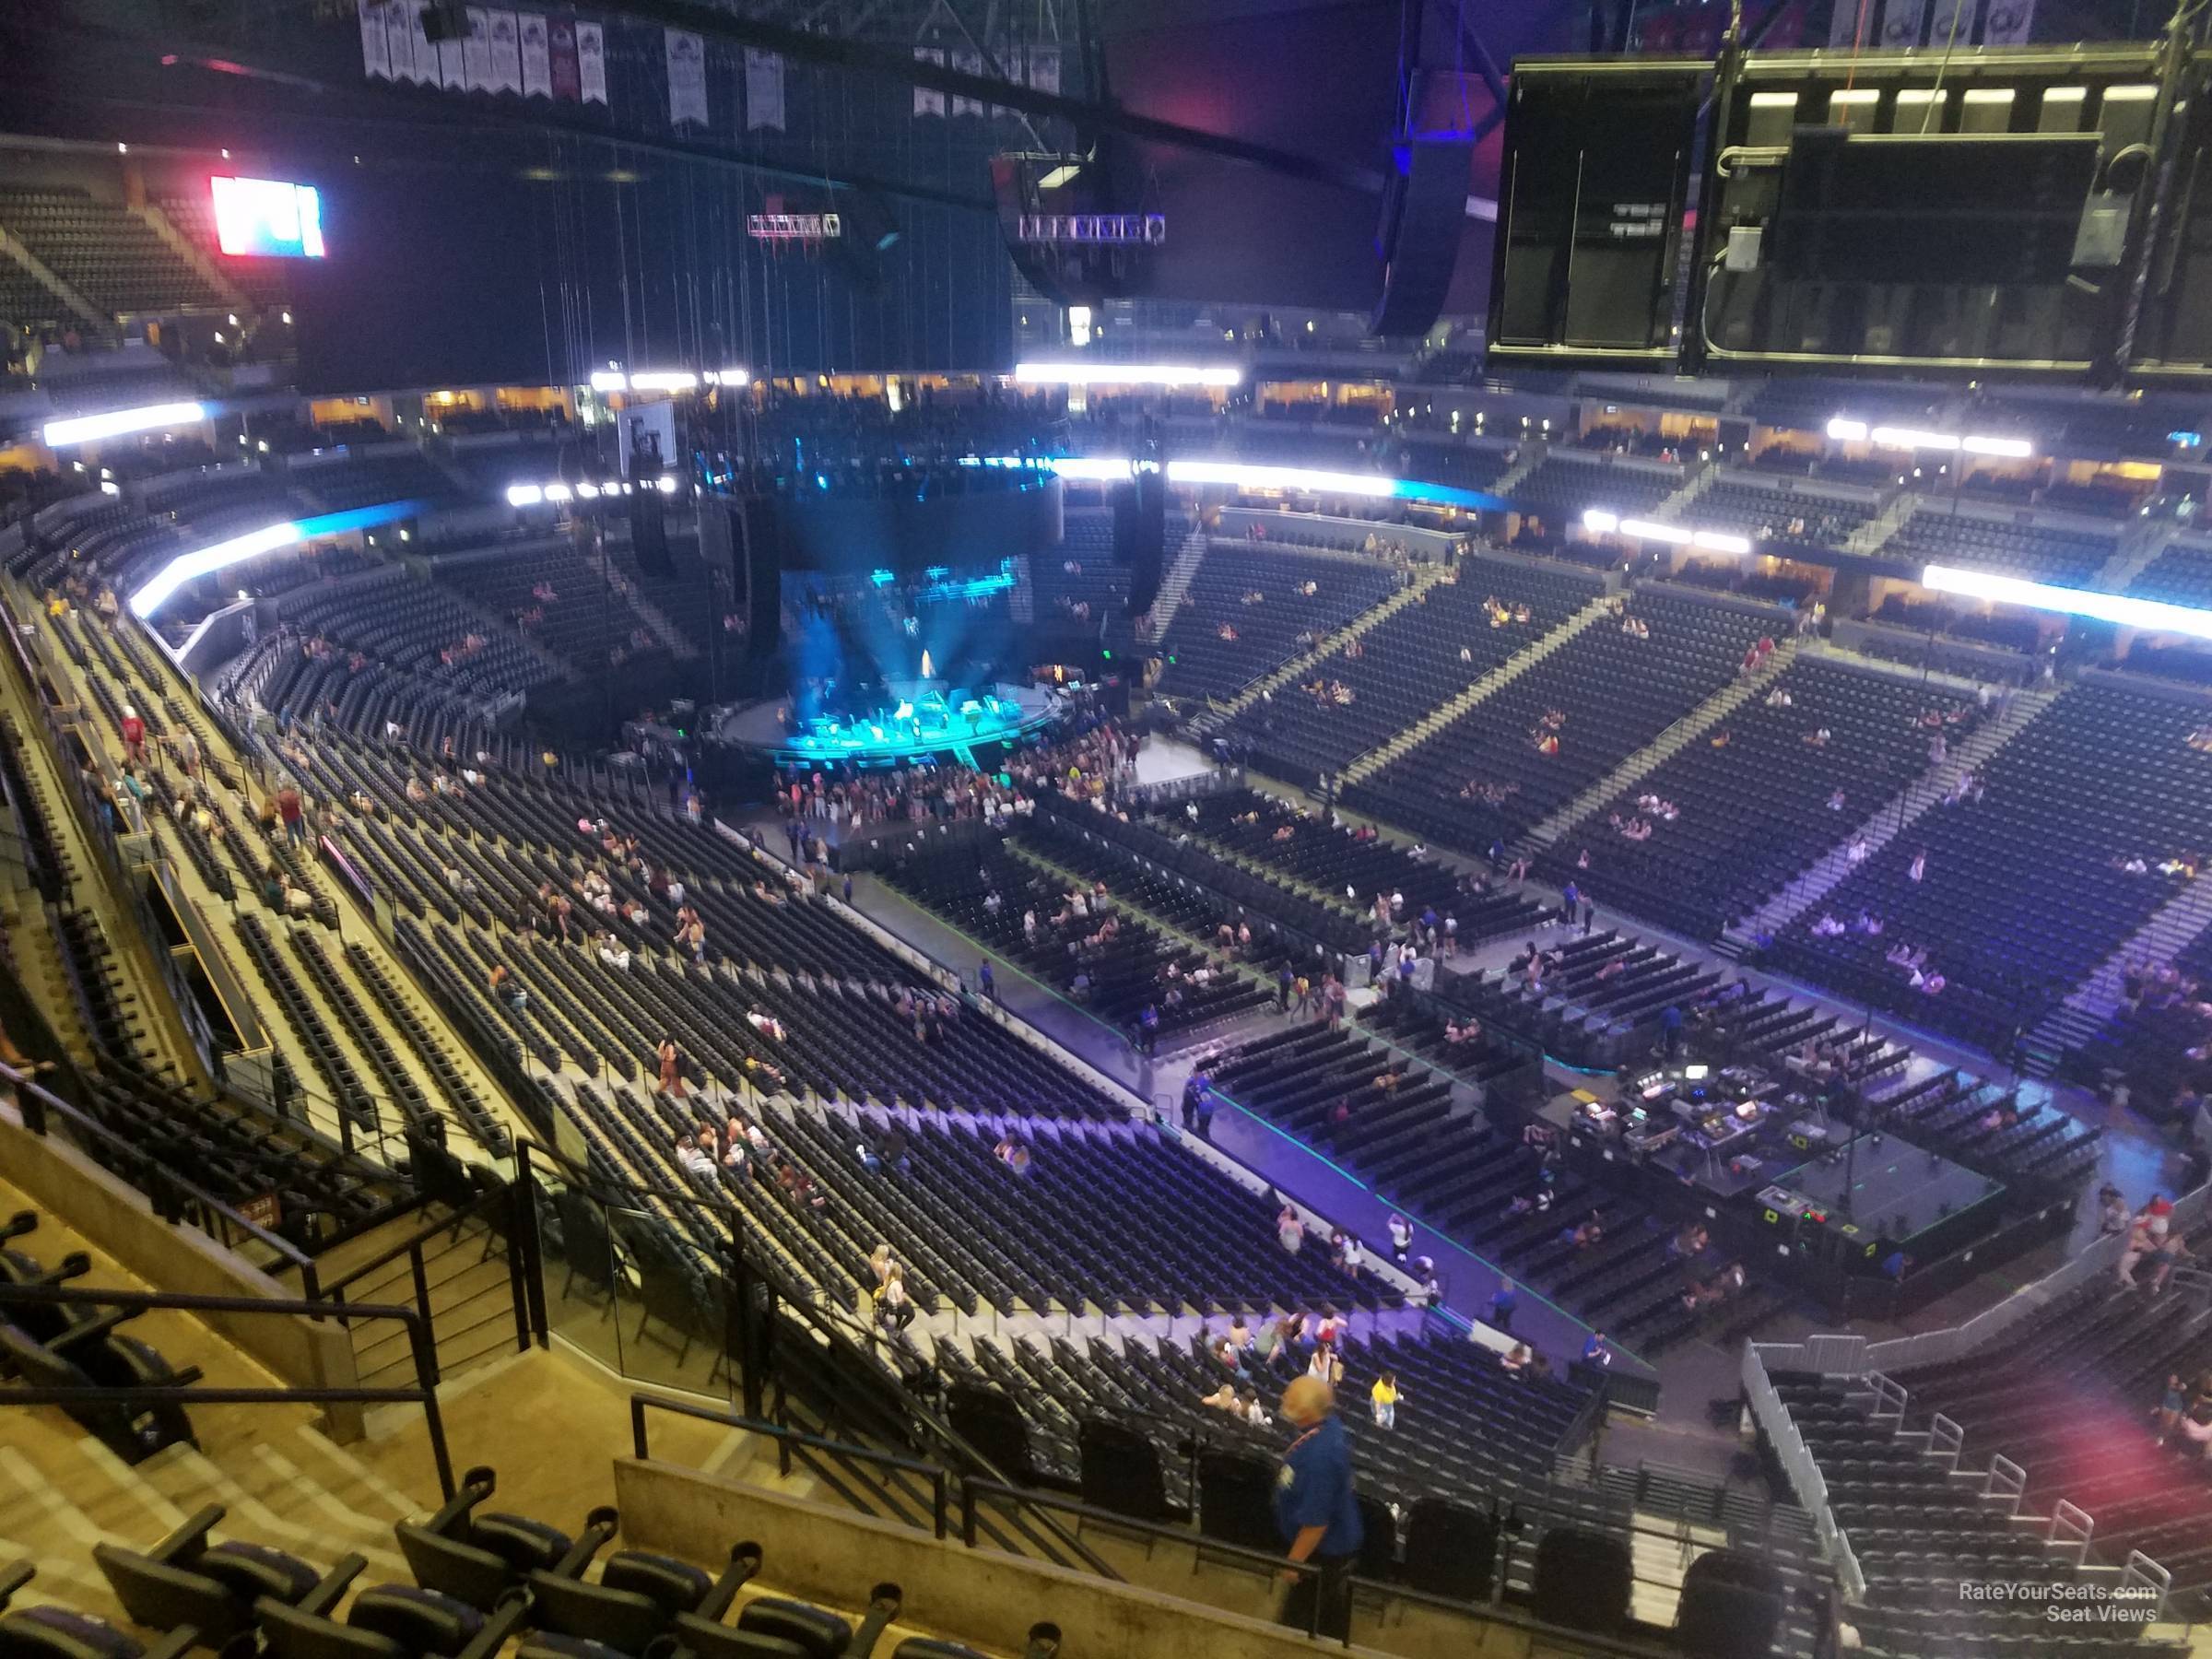 Section 332 at Pepsi Center for Concerts